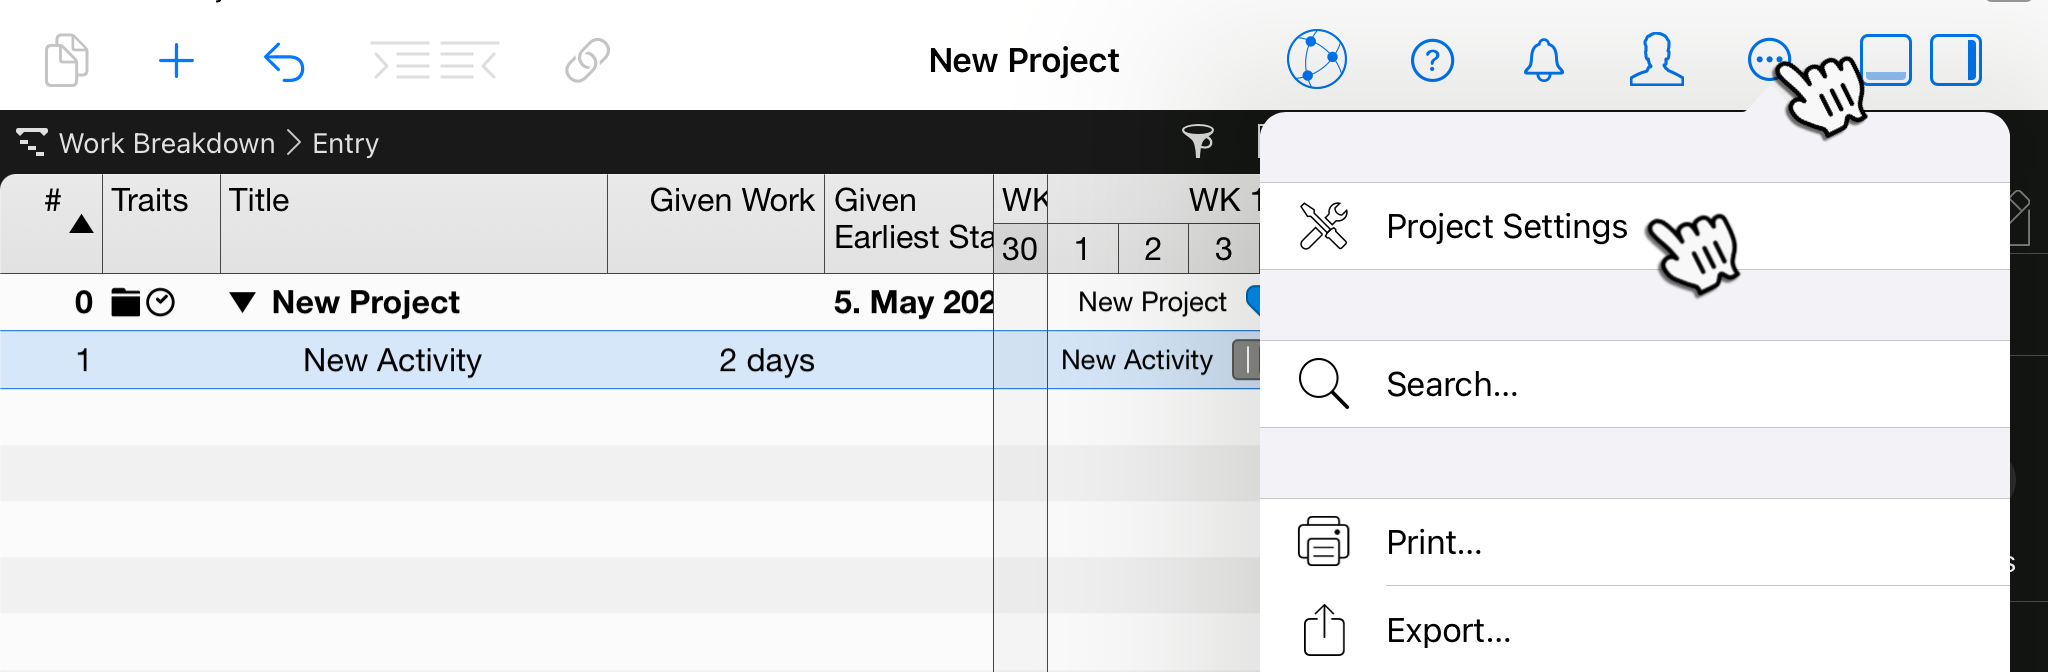 Merlin Project on the iPad - Project Settings